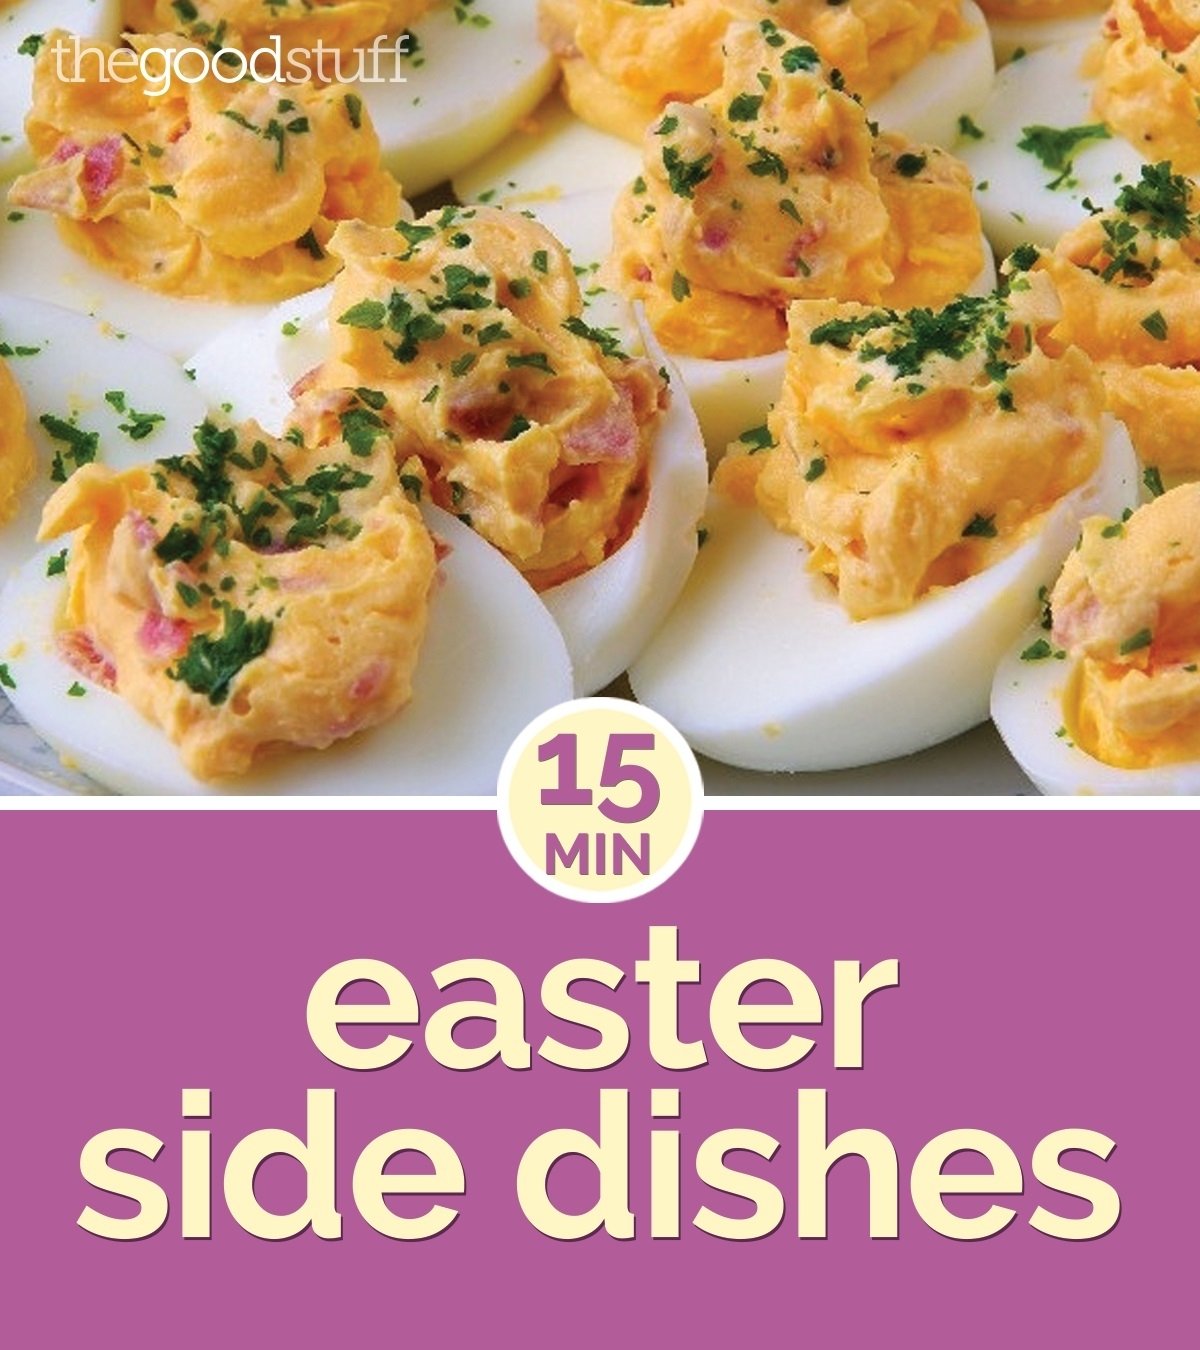 10 Spectacular Easter Dinner Side Dish Ideas 15 minute easter side dishes thegoodstuff 2022